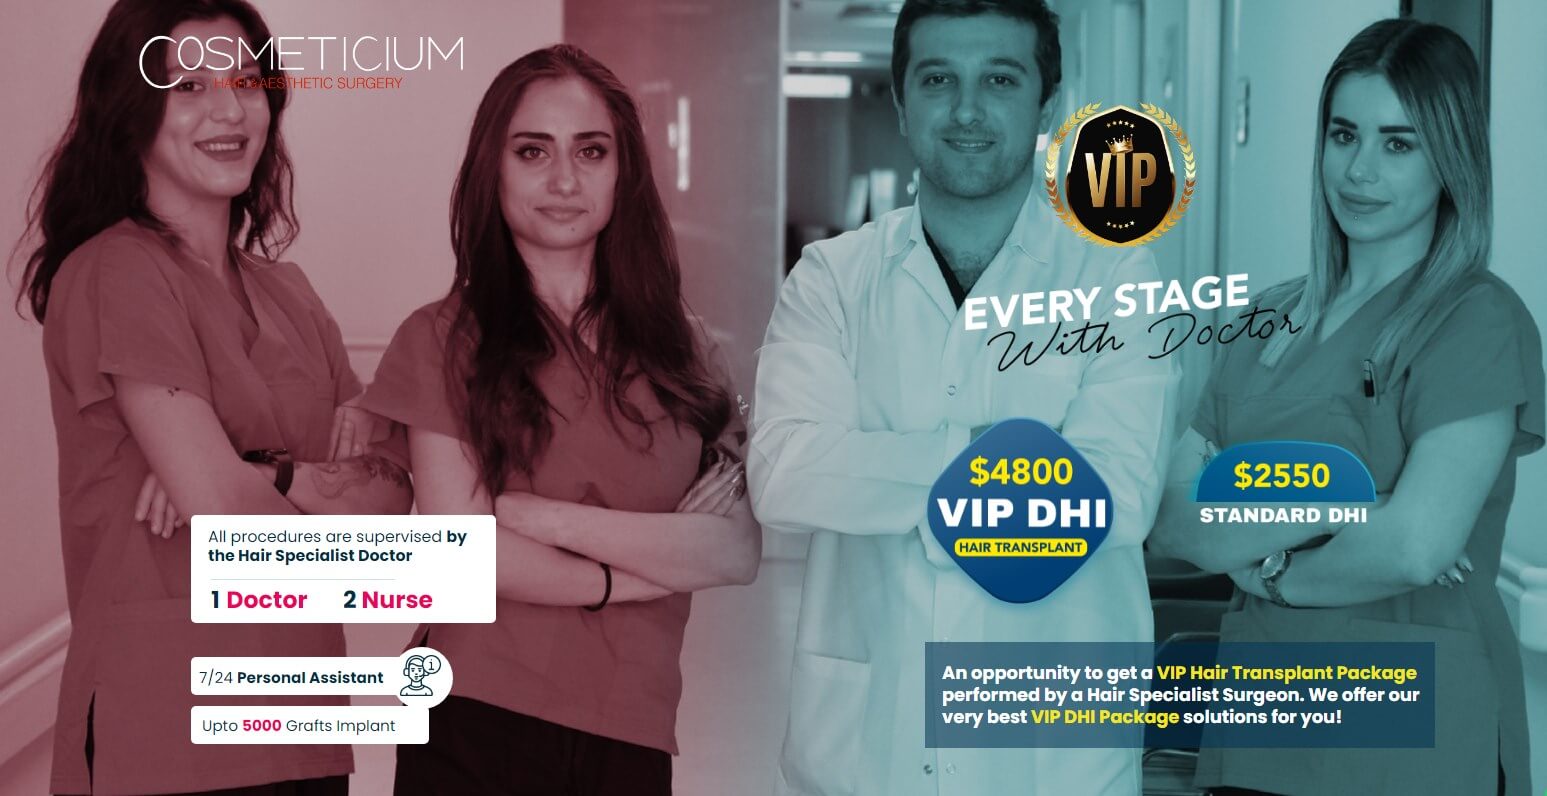 Let Your Doctor Take Care of Every Stage with VIP DHI Hair Transplantation